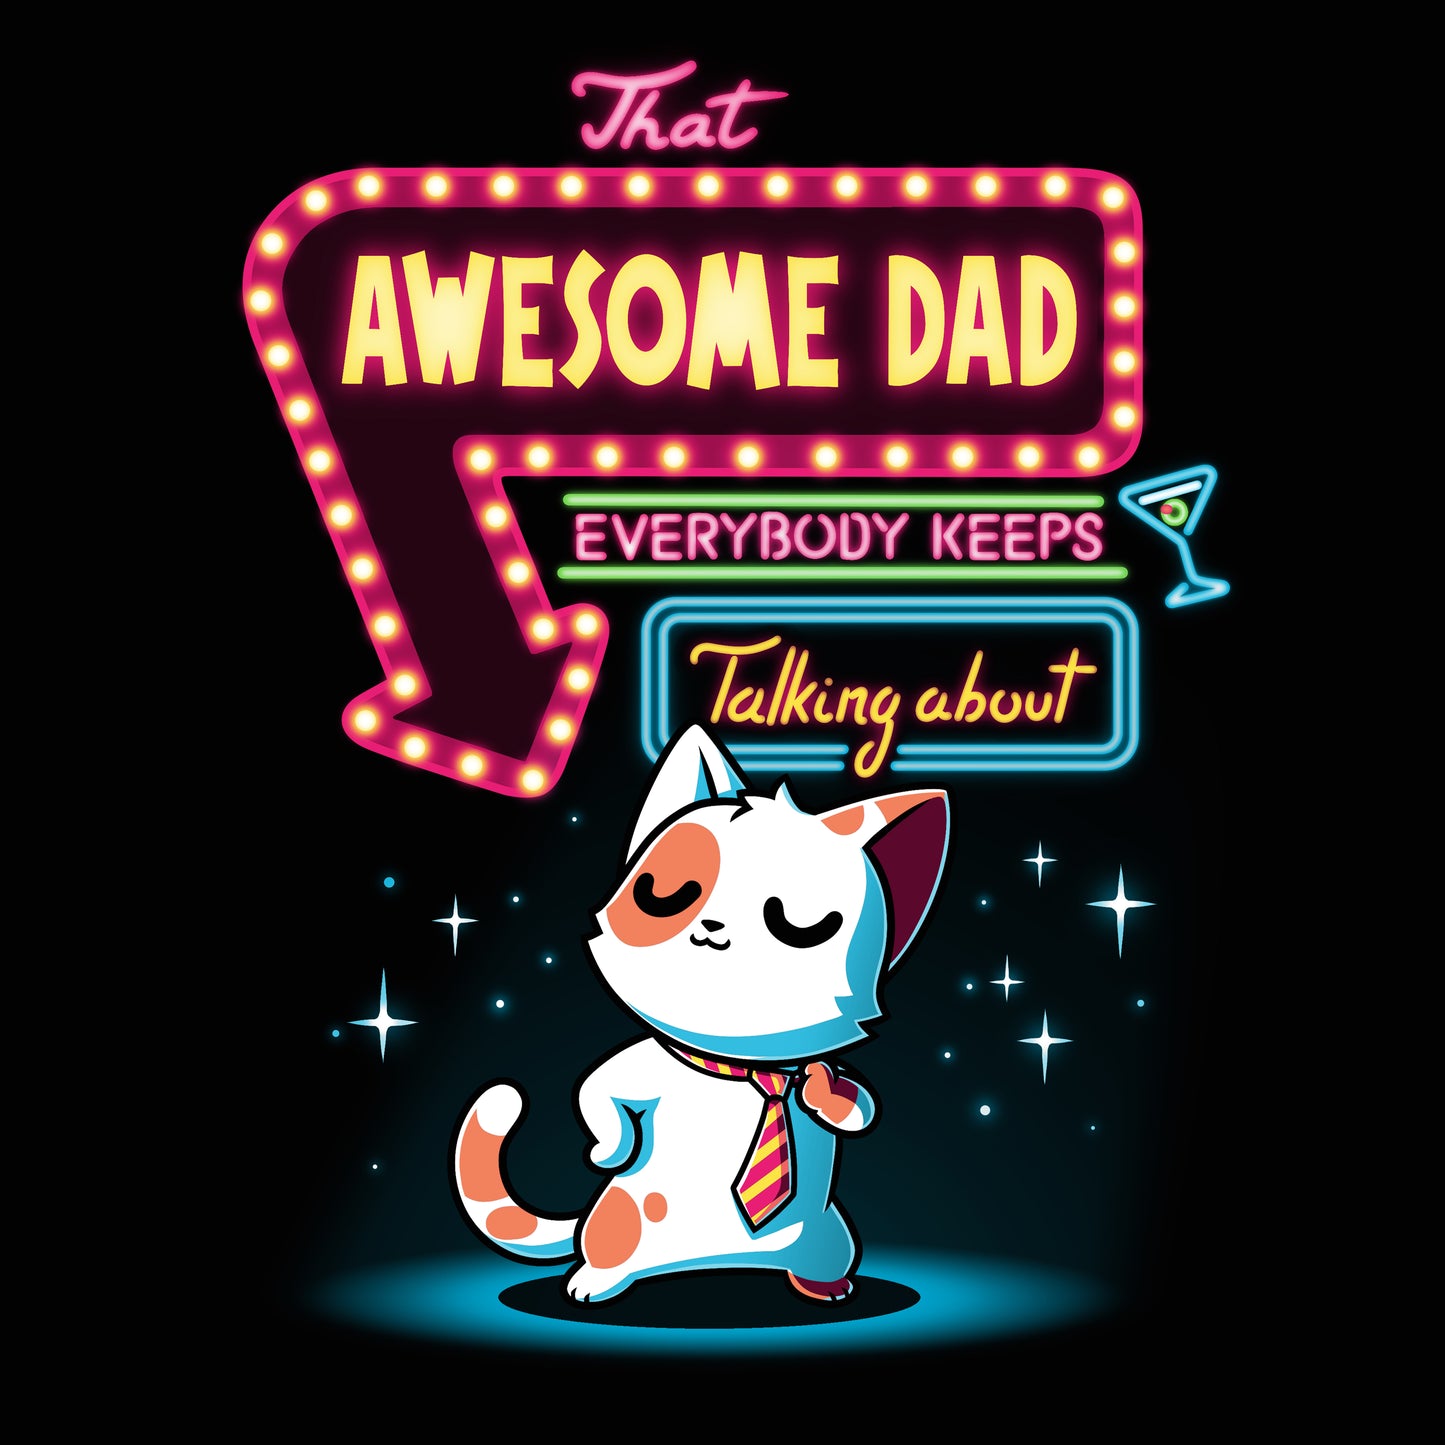 A cartoon cat wearing a tie stands confidently under a neon sign that reads "That Awesome Dad Everybody Keeps Talking About" with an arrow pointing to the cat, proudly showcased on a super soft ringspun cotton black t-shirt by monsterdigital called "That Awesome Dad.